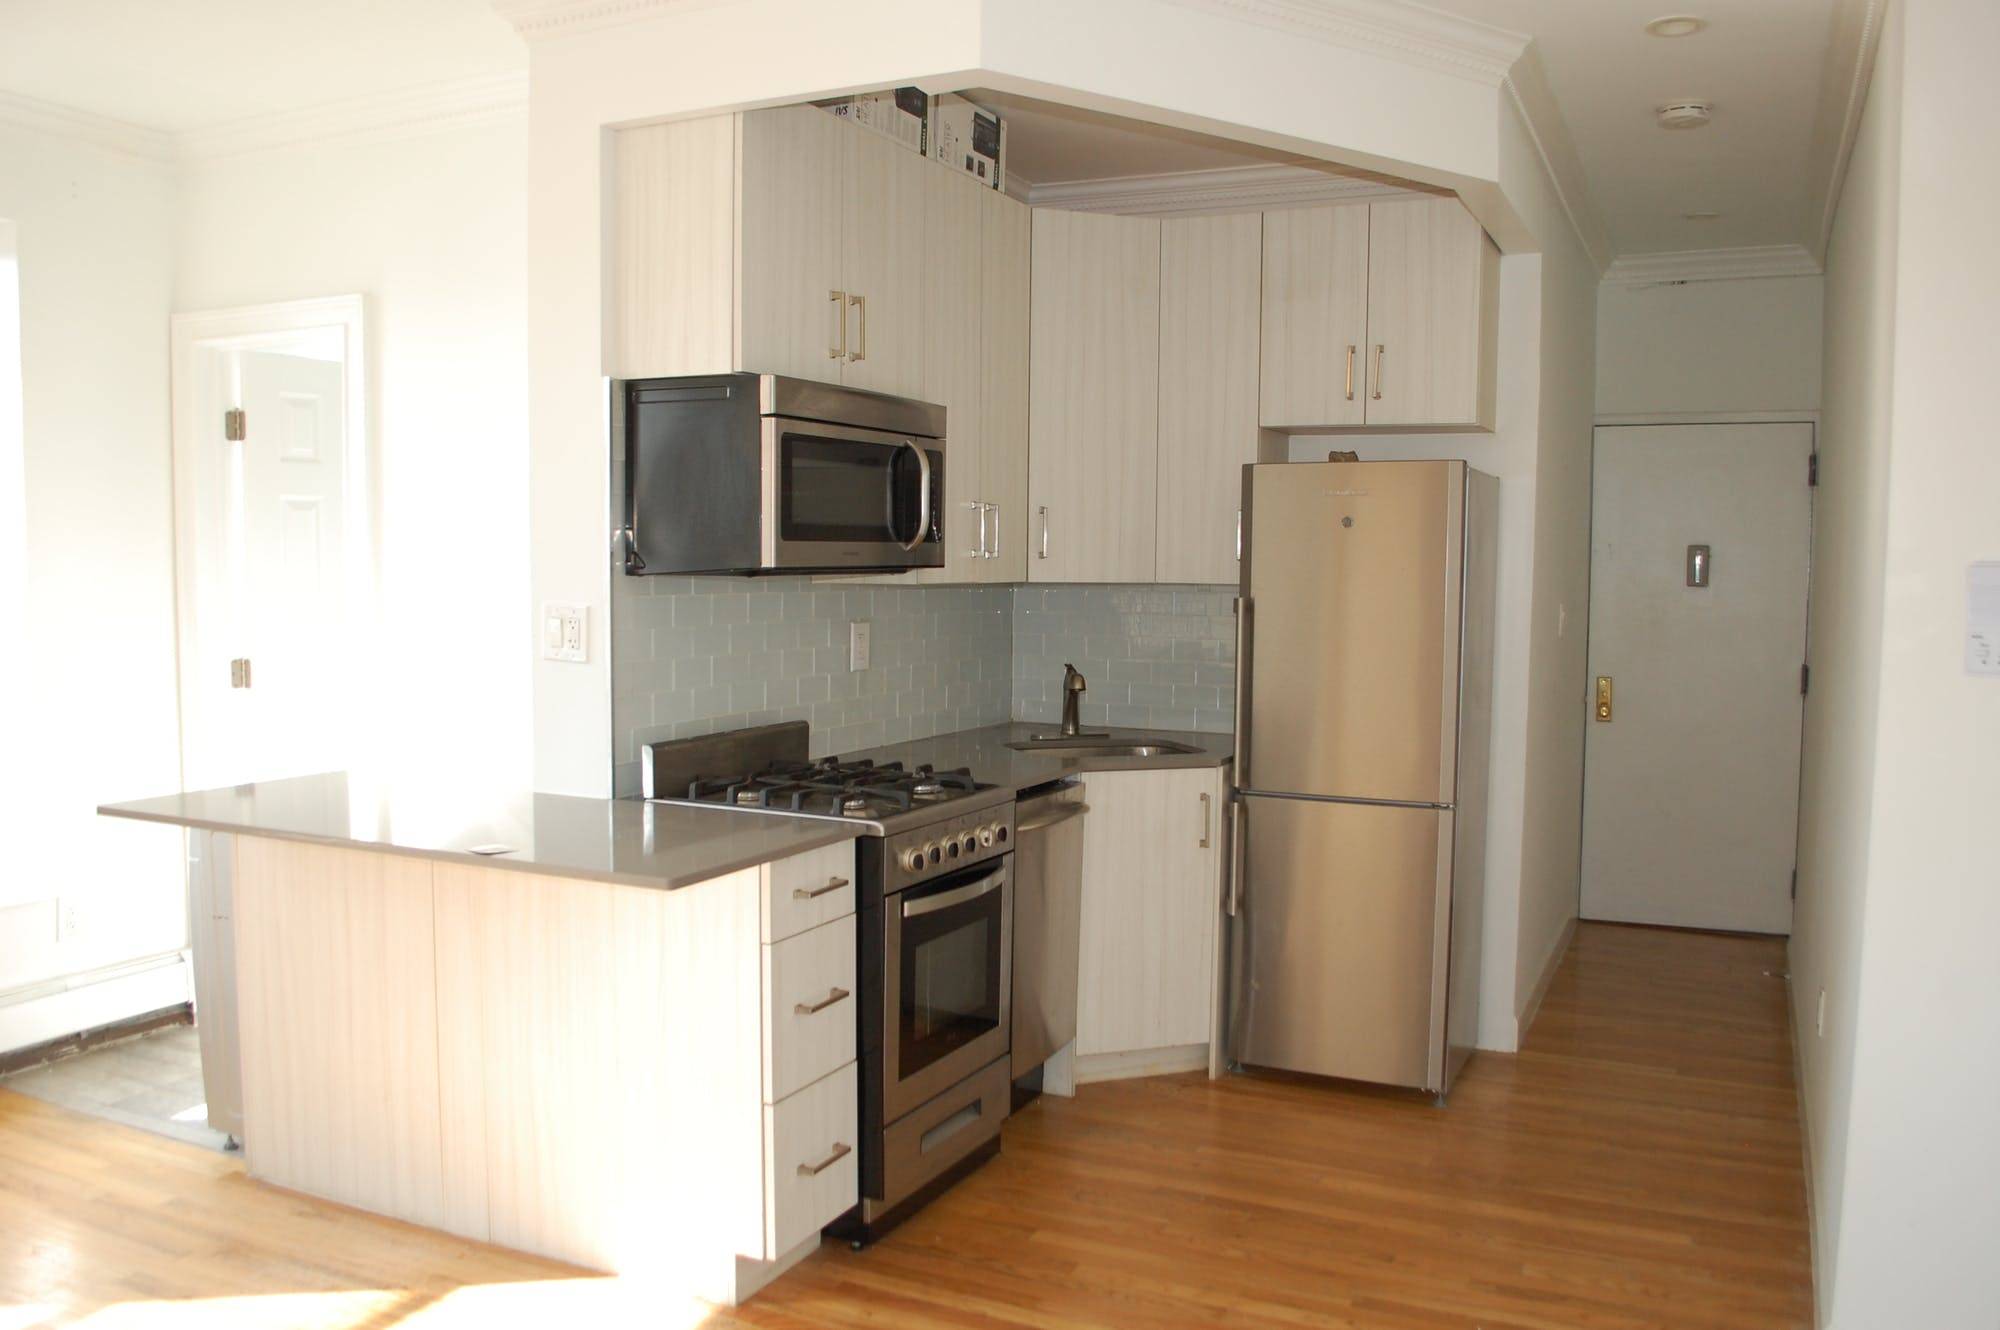 Renovated 2 bedroom apartment in Williamsburg, No Brokers fee 2 month free.